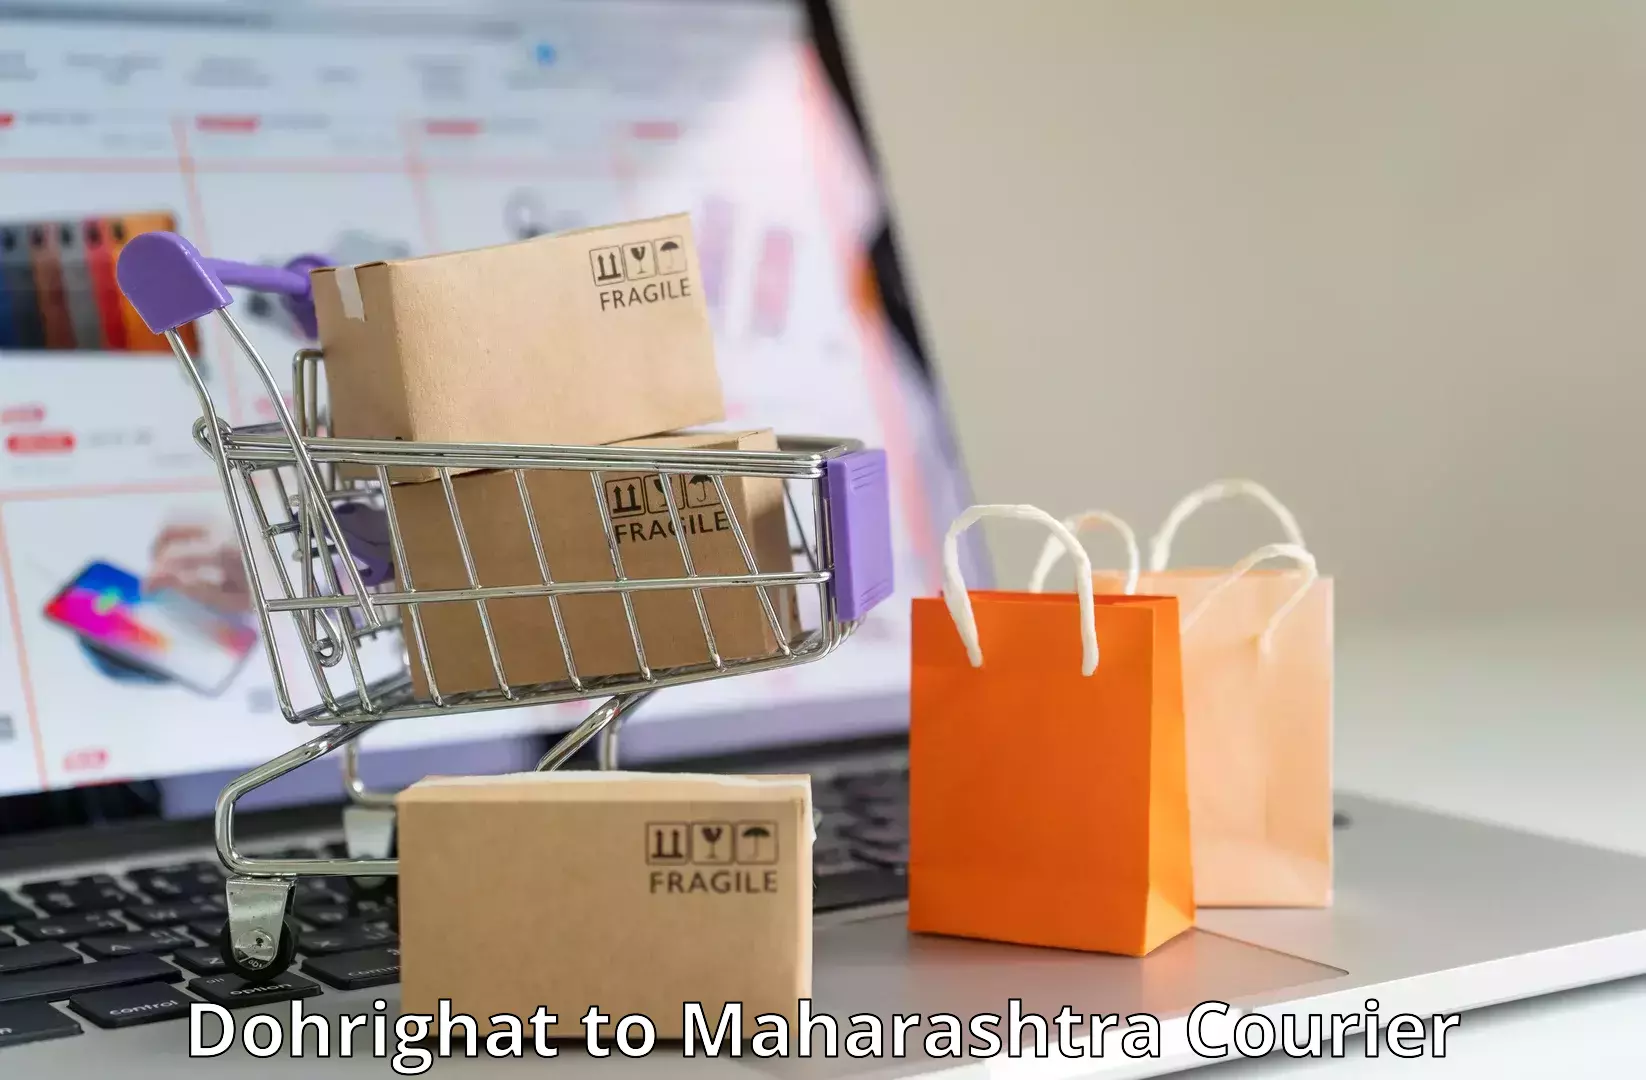 Expedited shipping methods Dohrighat to Virar